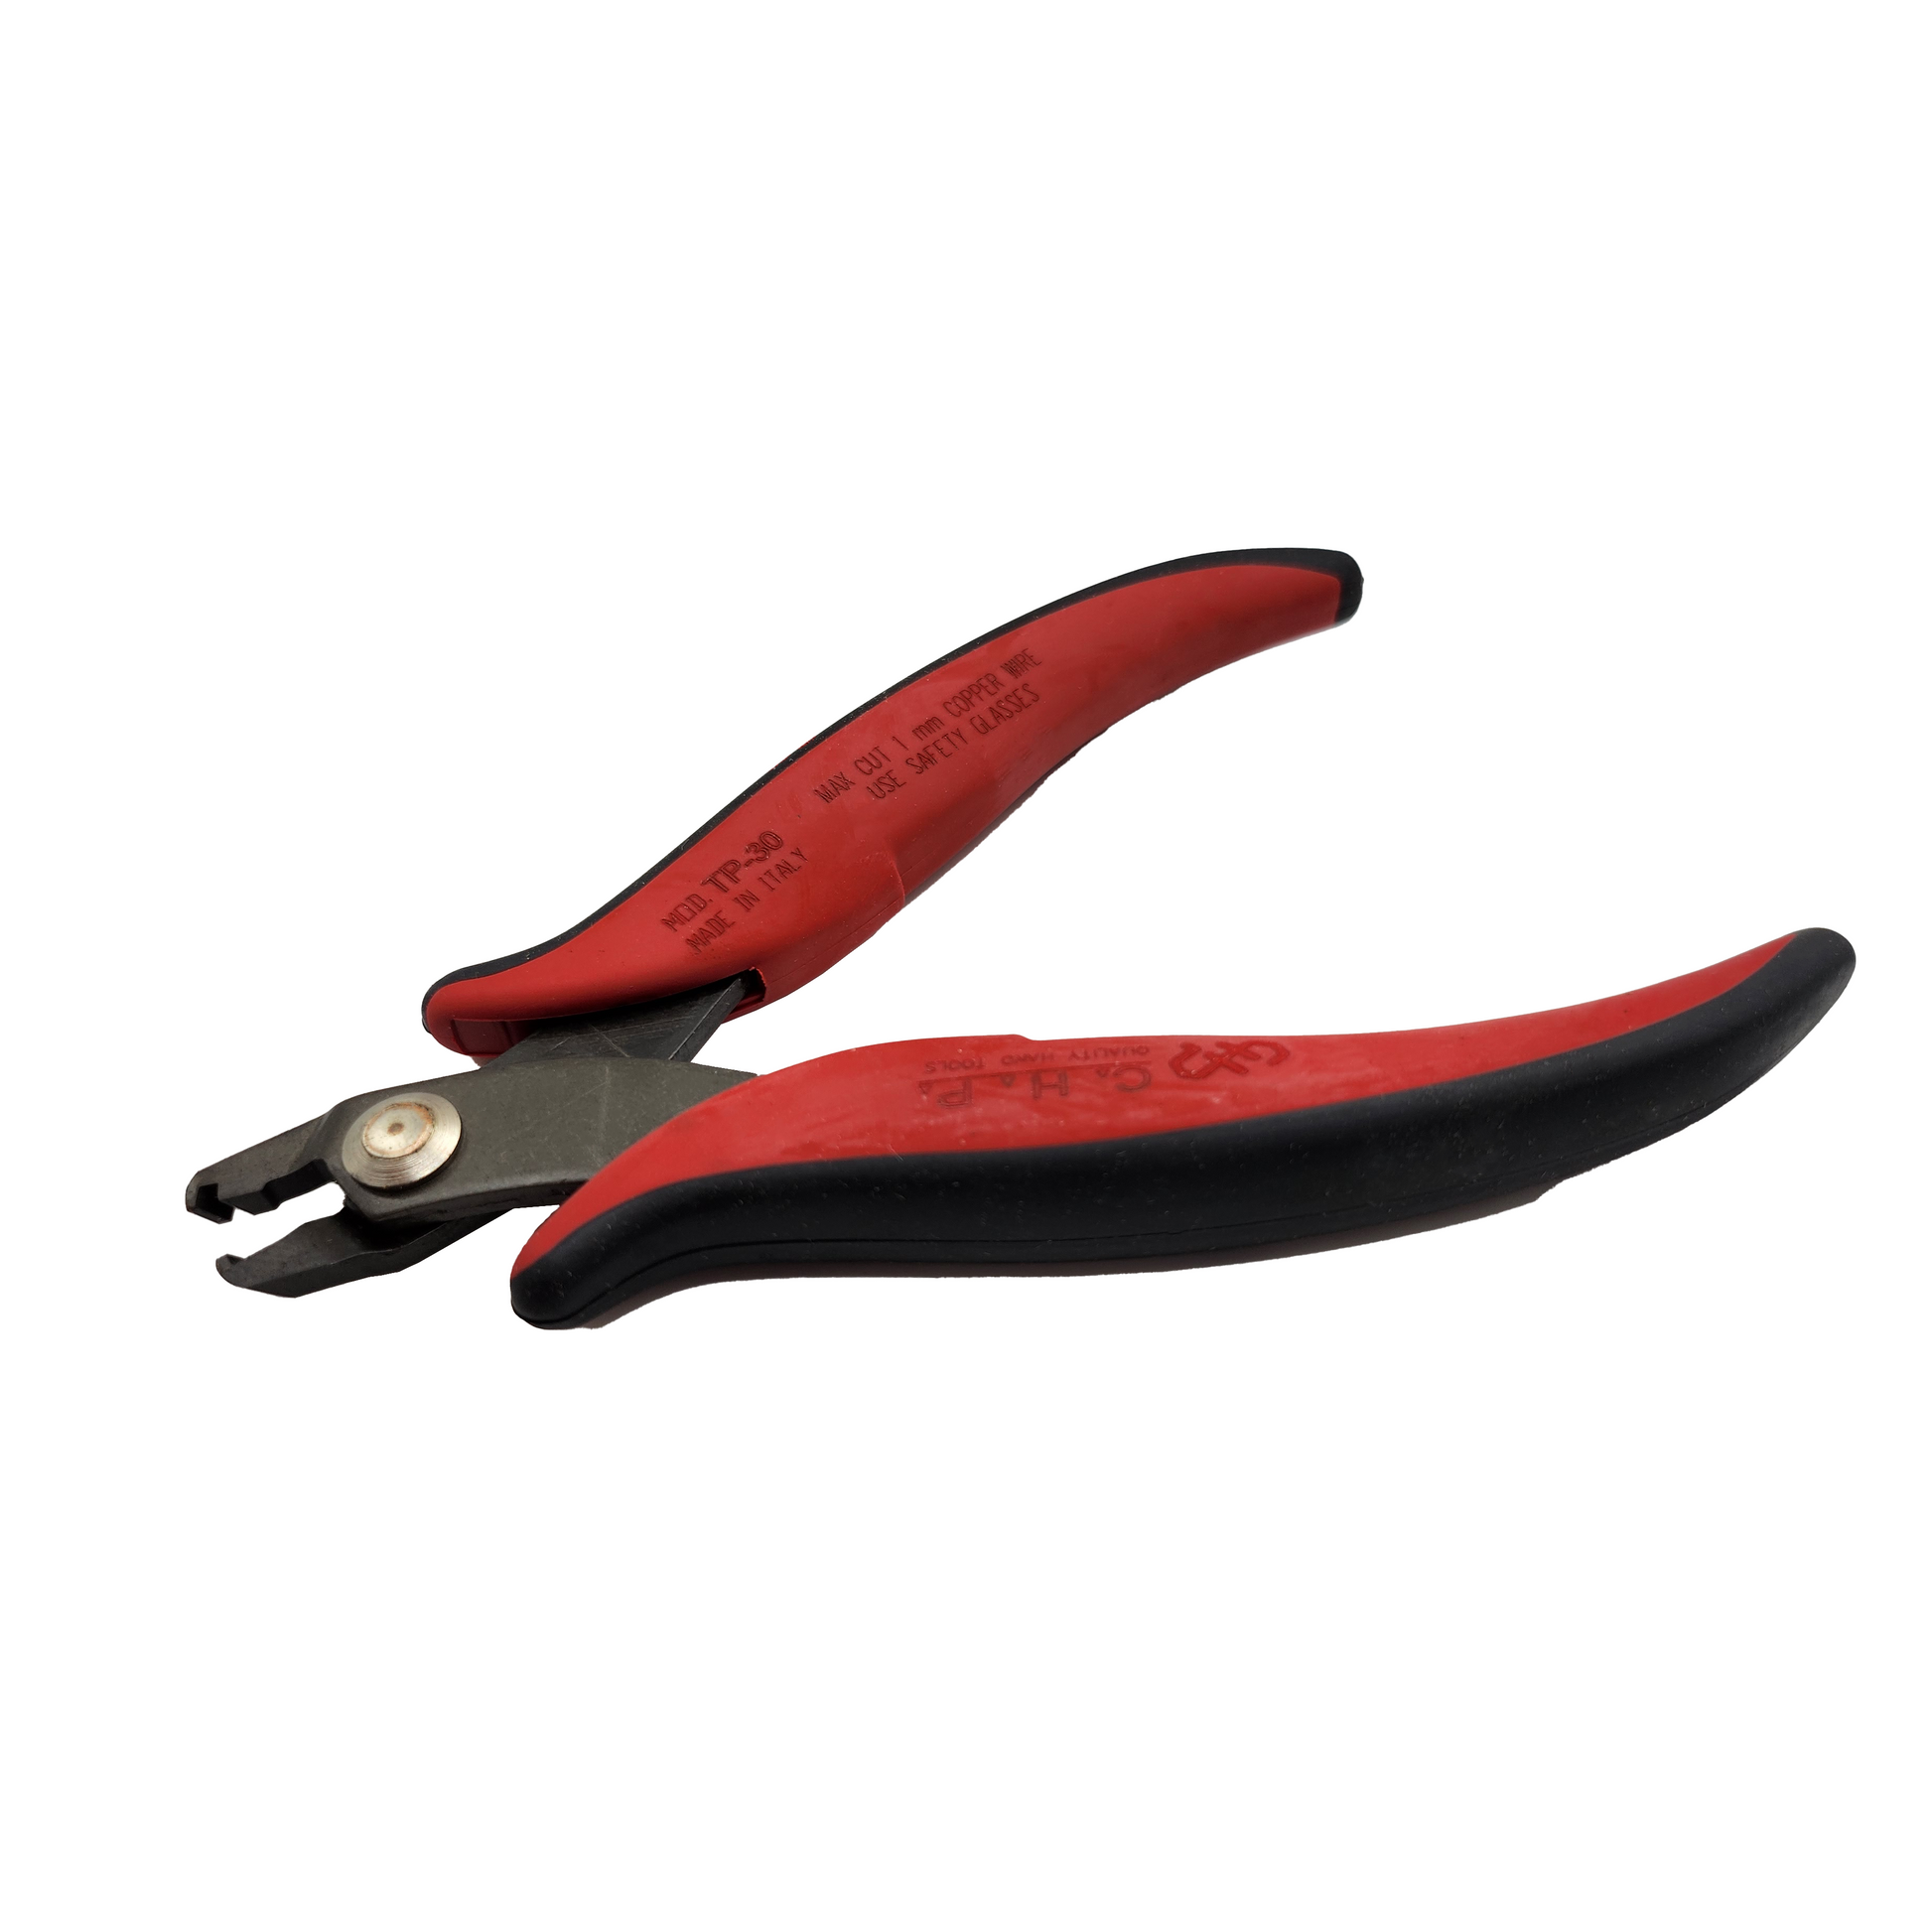 CHP_ CHP TP-30 Lead Forming Tool_ Cutters, Pliers, Multi-Tools_ Hakko Products